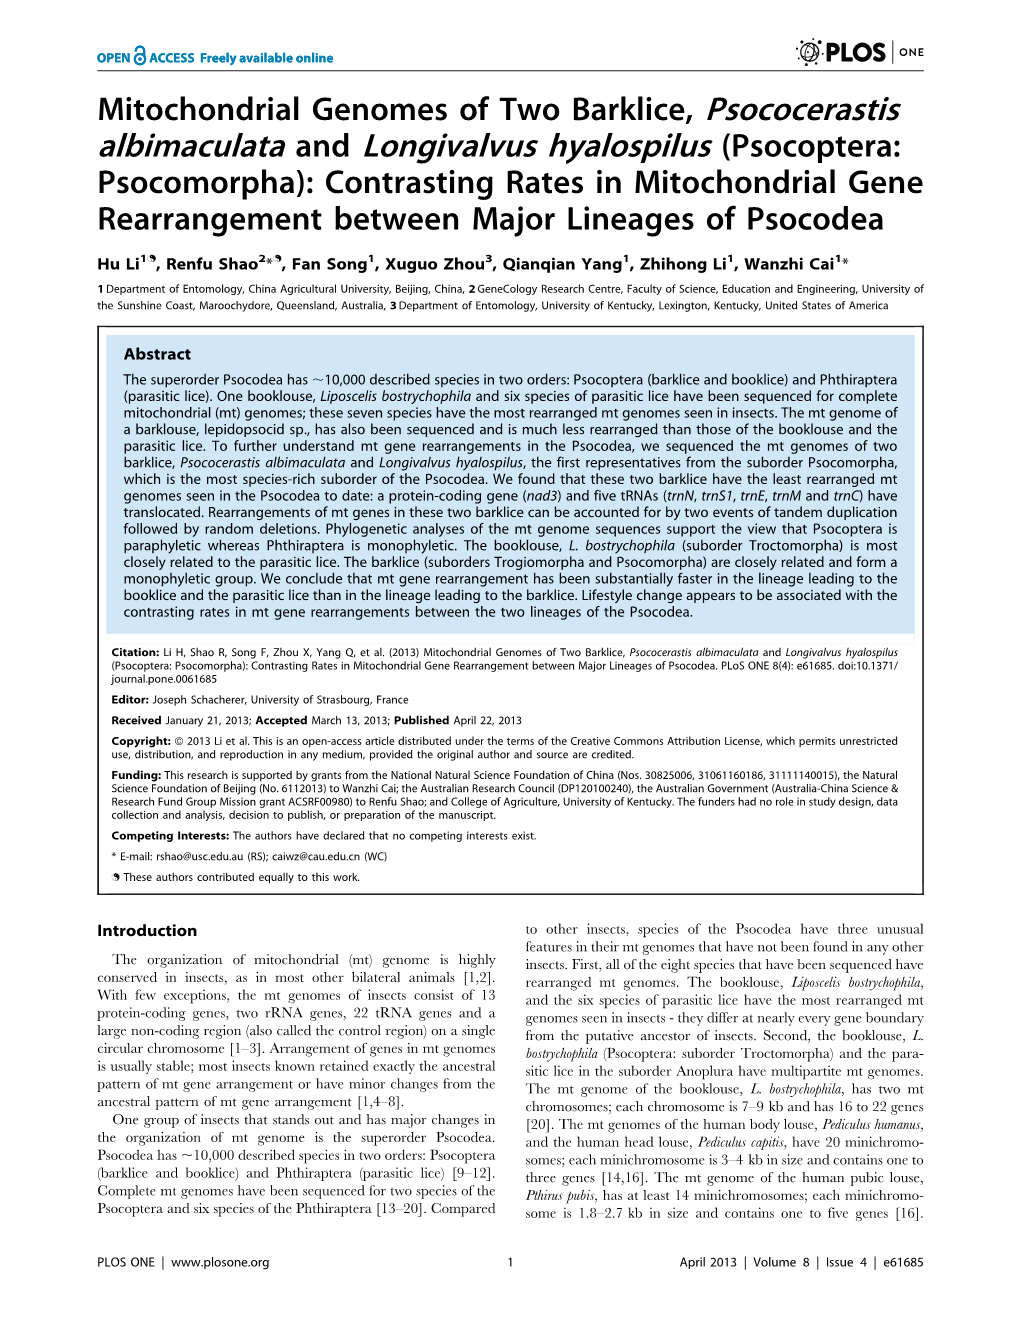 Albimaculata and Longivalvus Hyalospilus (Psocoptera: Psocomorpha): Contrasting Rates in Mitochondrial Gene Rearrangement Between Major Lineages of Psocodea